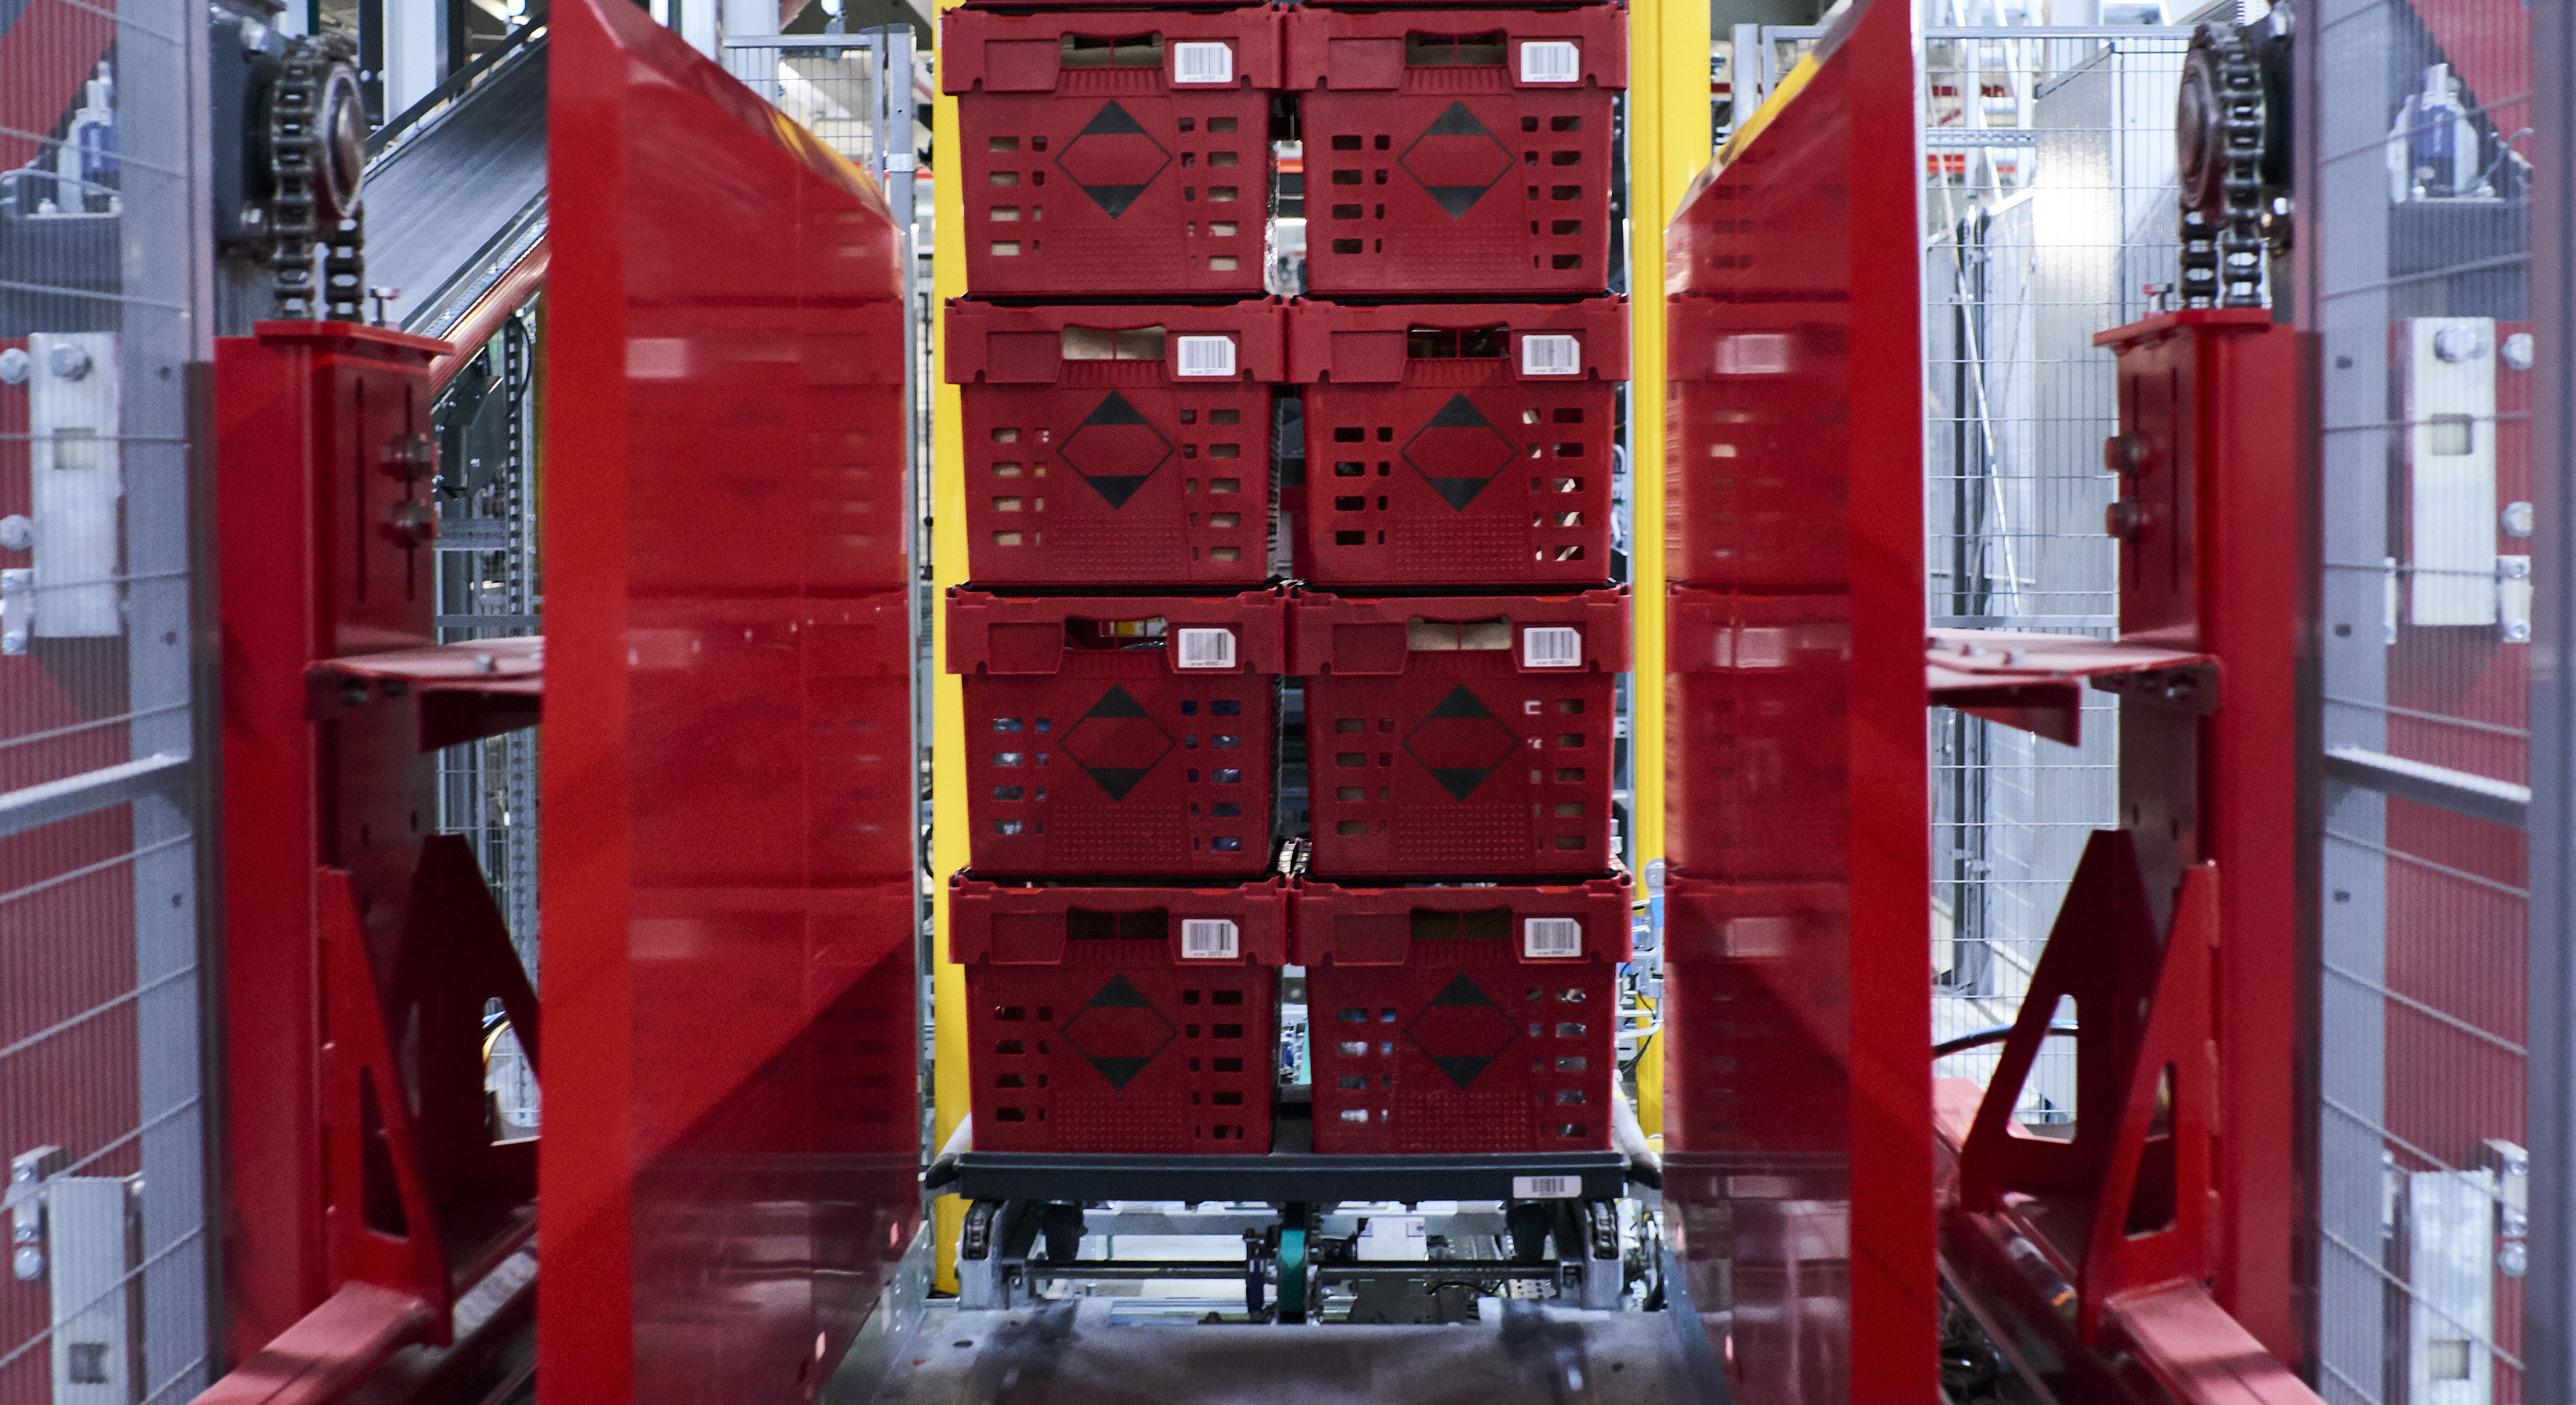 The image shows red containers that are being stacked using automated technology.